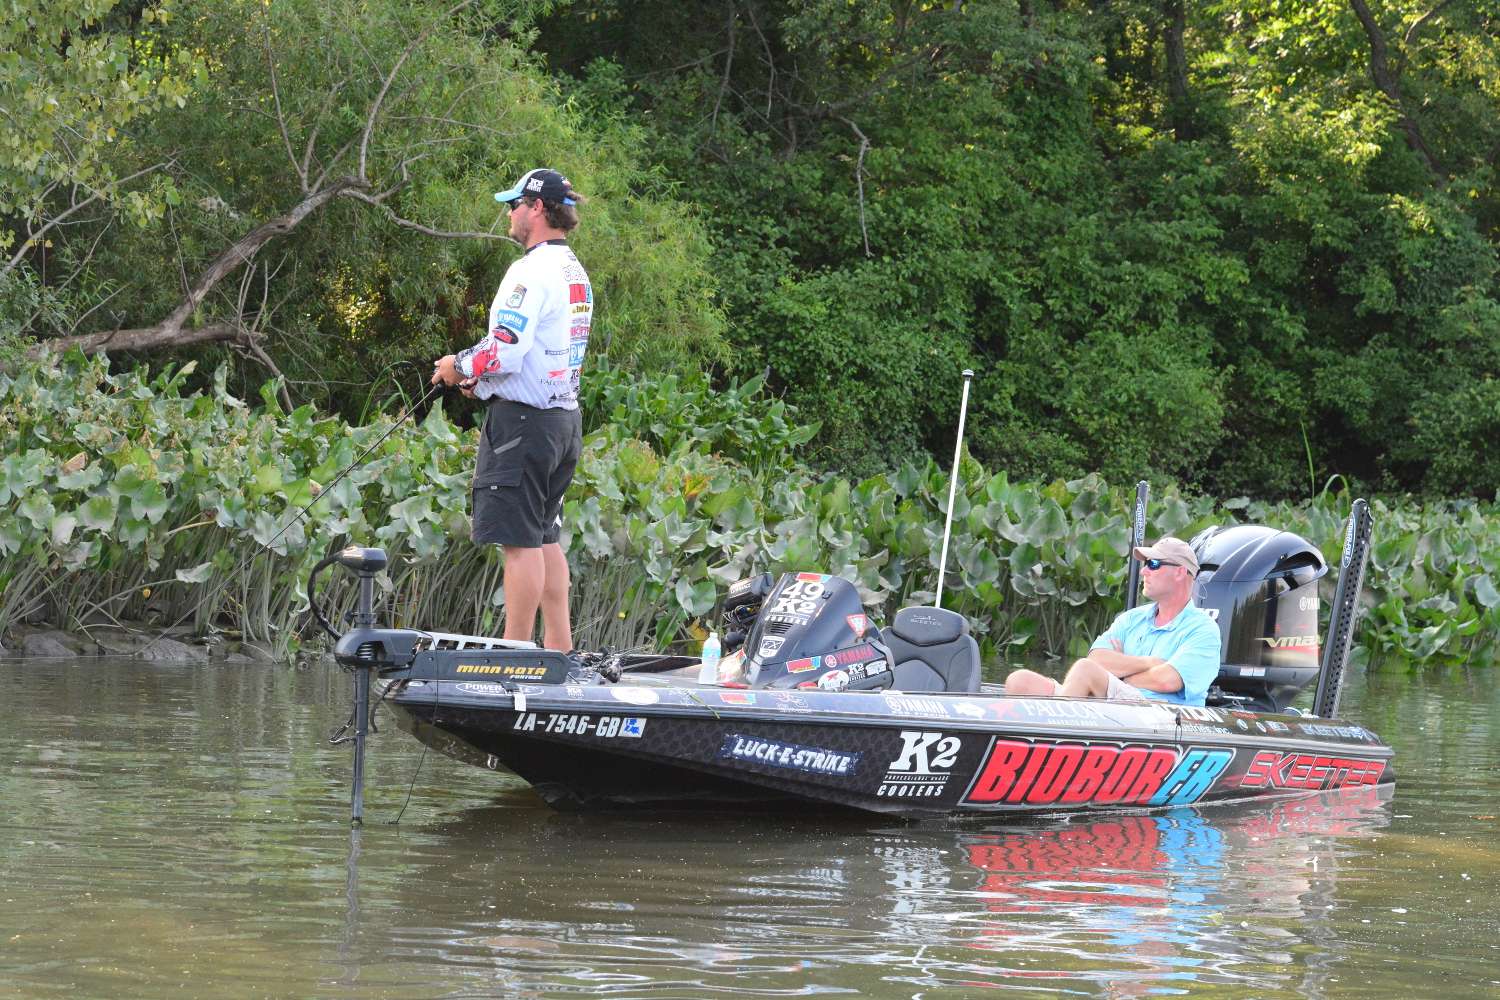 Cliff Crochet starts at the mouth of Darby Creek on Day 3 of the Bassmaster Elite at Delaware River.